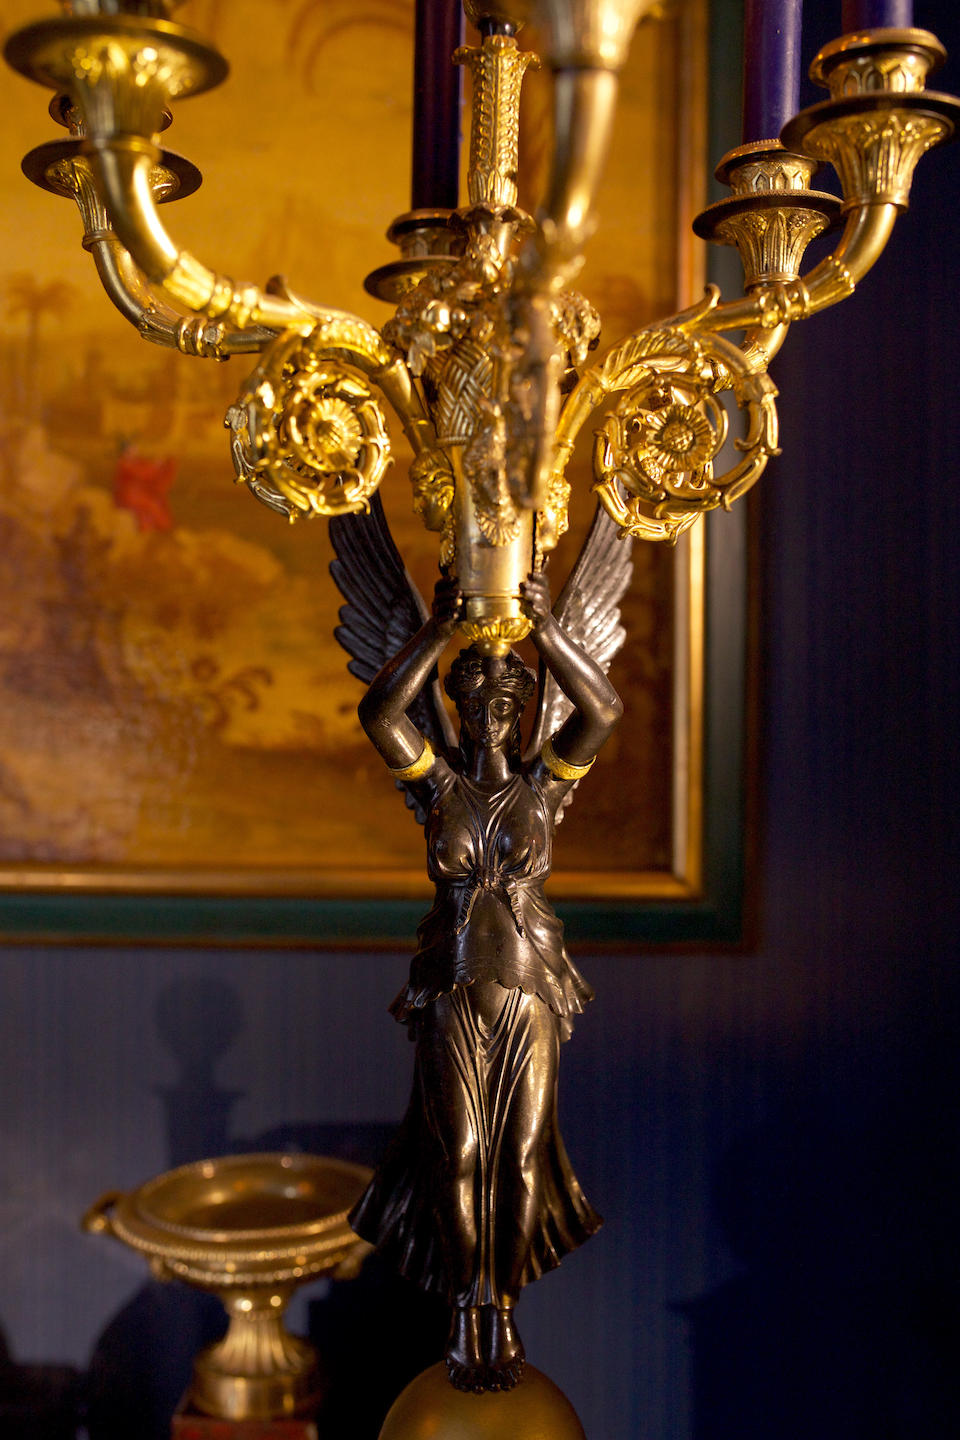 A large pair of French 19th century gilt and patinated bronze six branch candelabra In the manner of Pierre-Philippe Thomire (2)